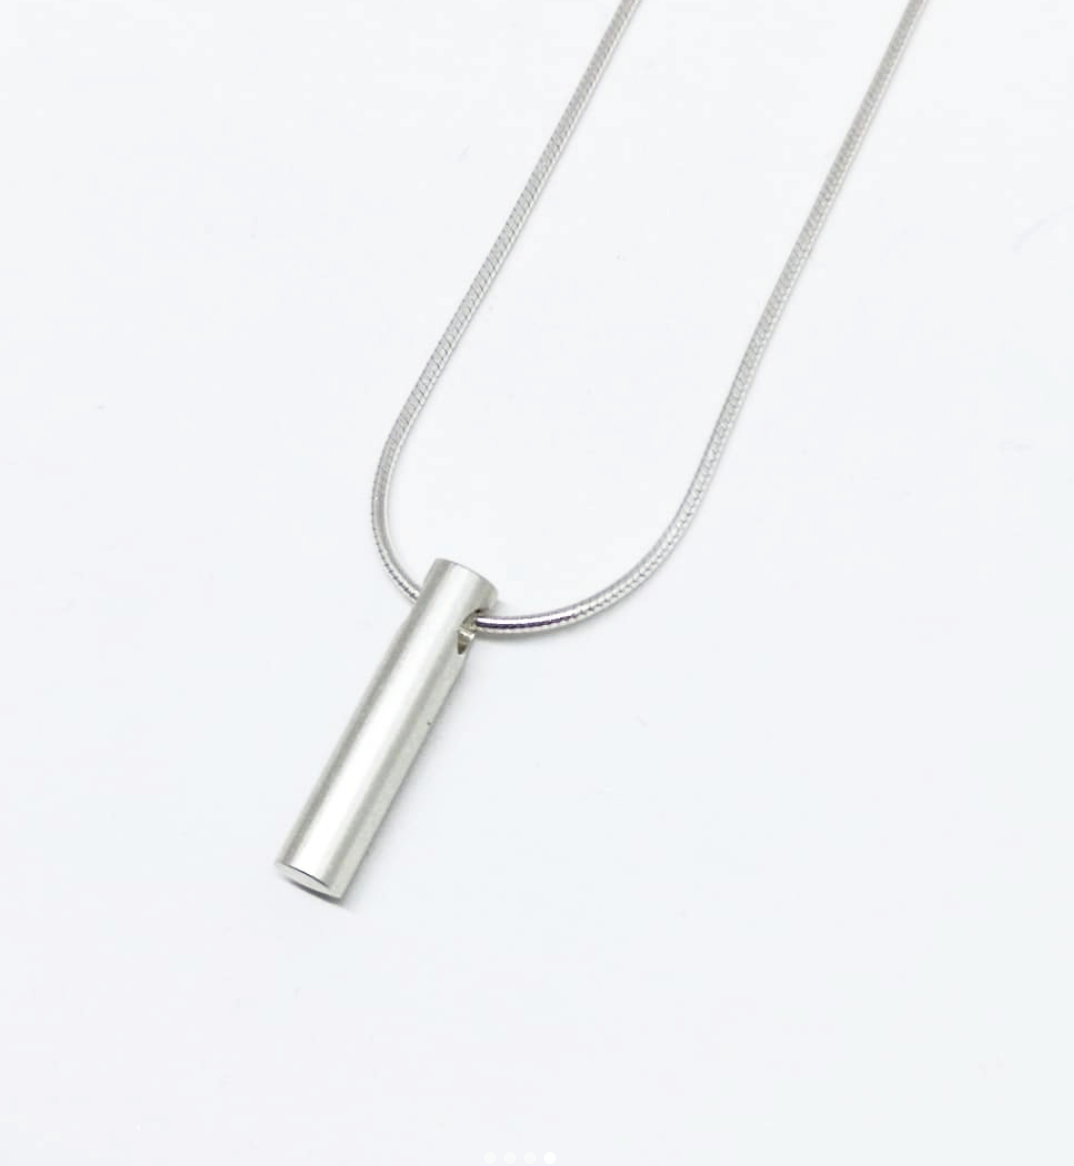 An alternate image of the Long Cylinder Pendant